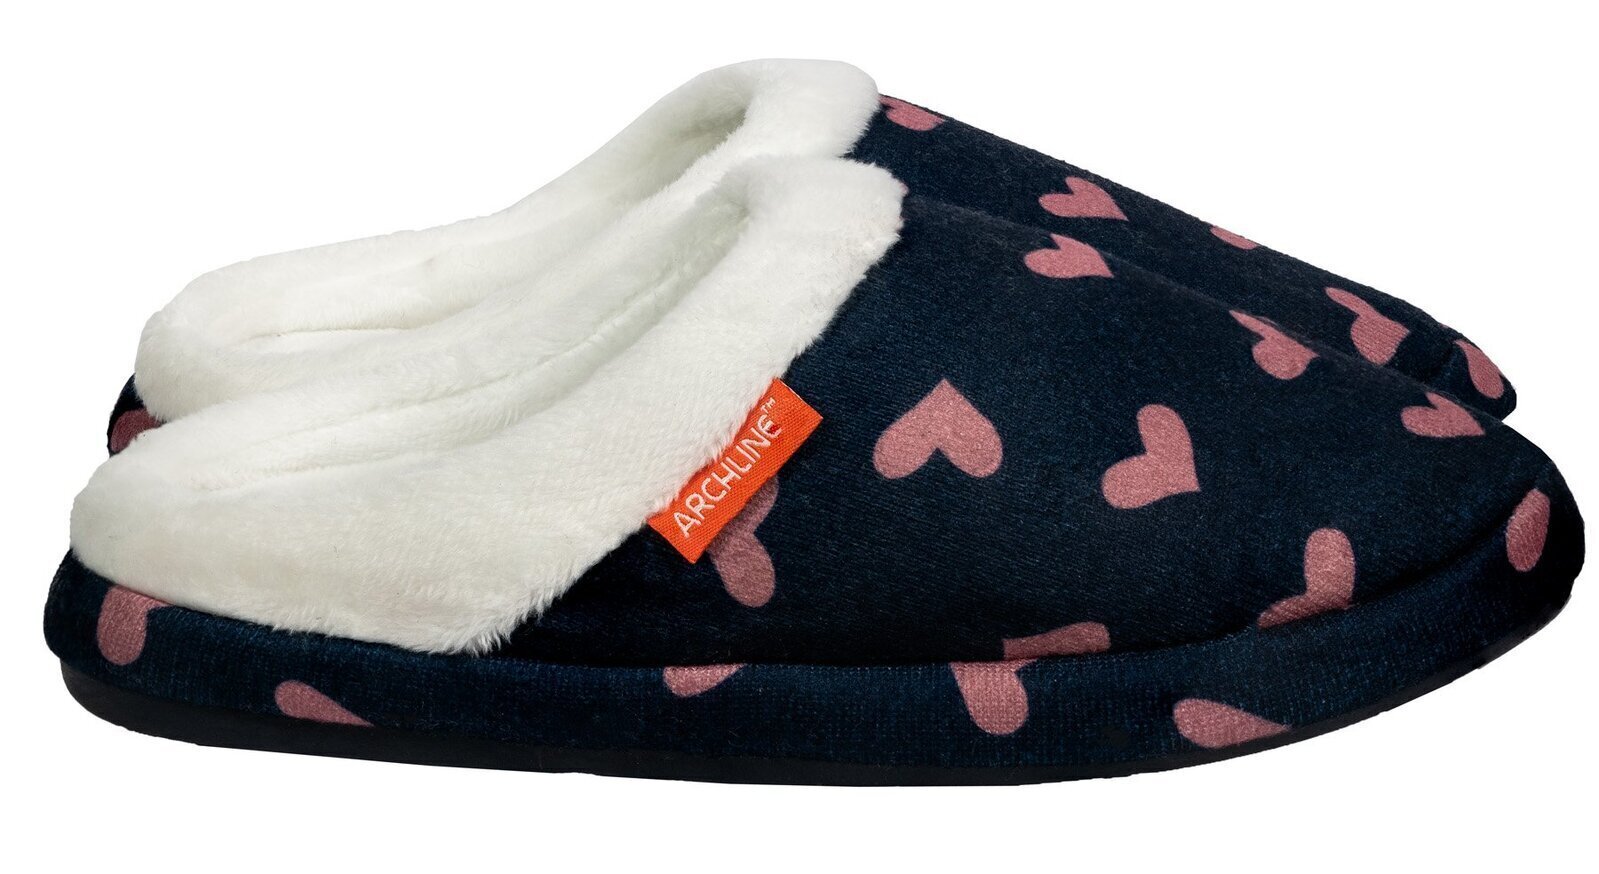 Orthotic Slippers Slip On Scuffs Pain Relief Moccasins - Navy with Hearts - EUR 37 (Womens US 6)